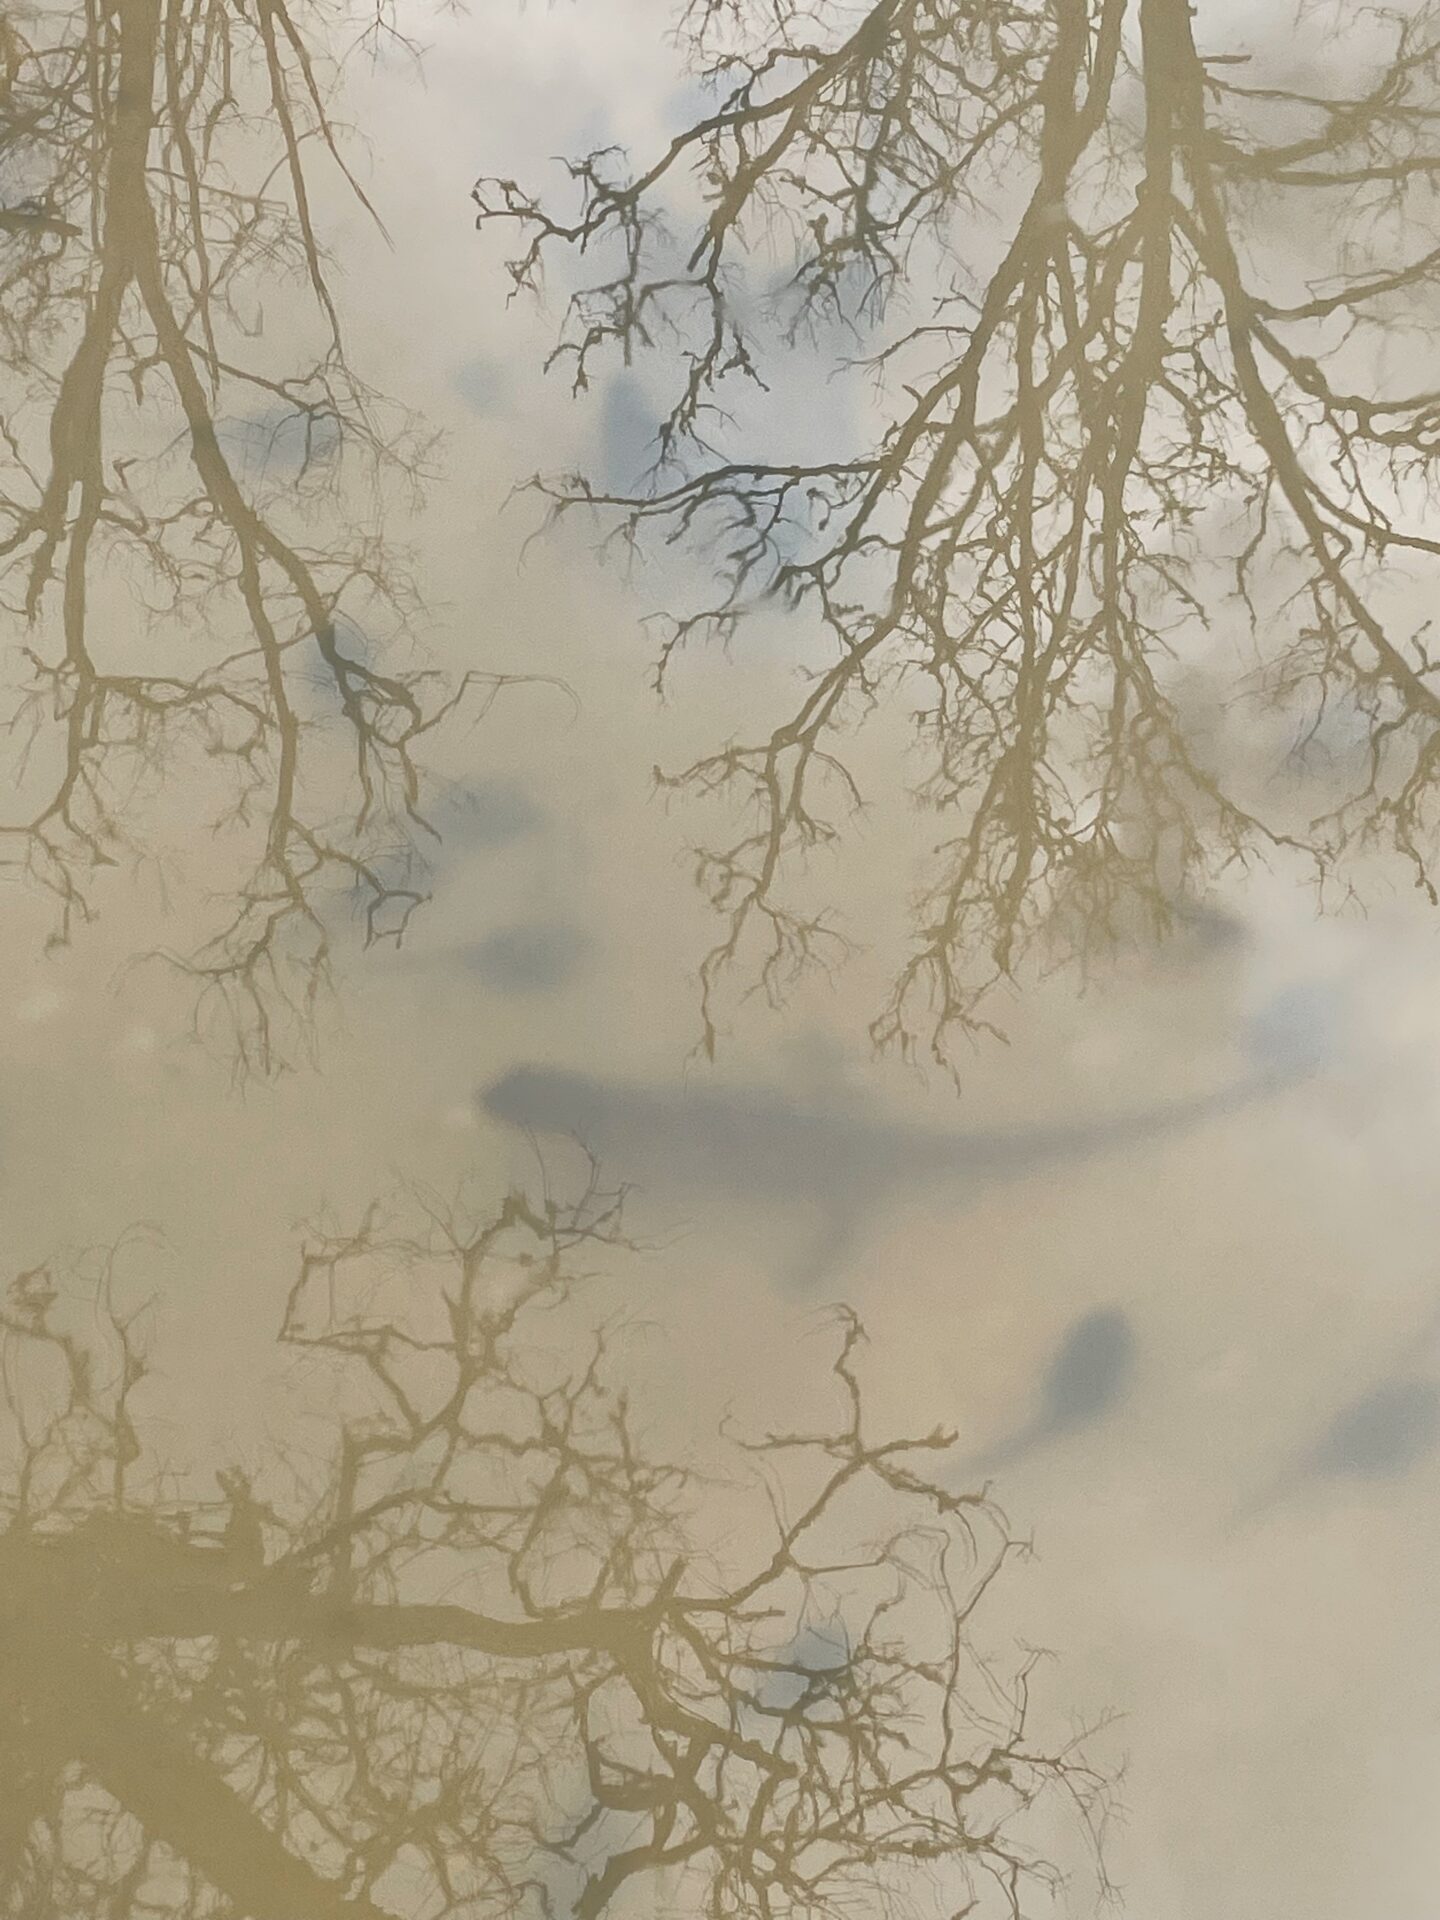 Lizard, tadpoles, and reflected trees